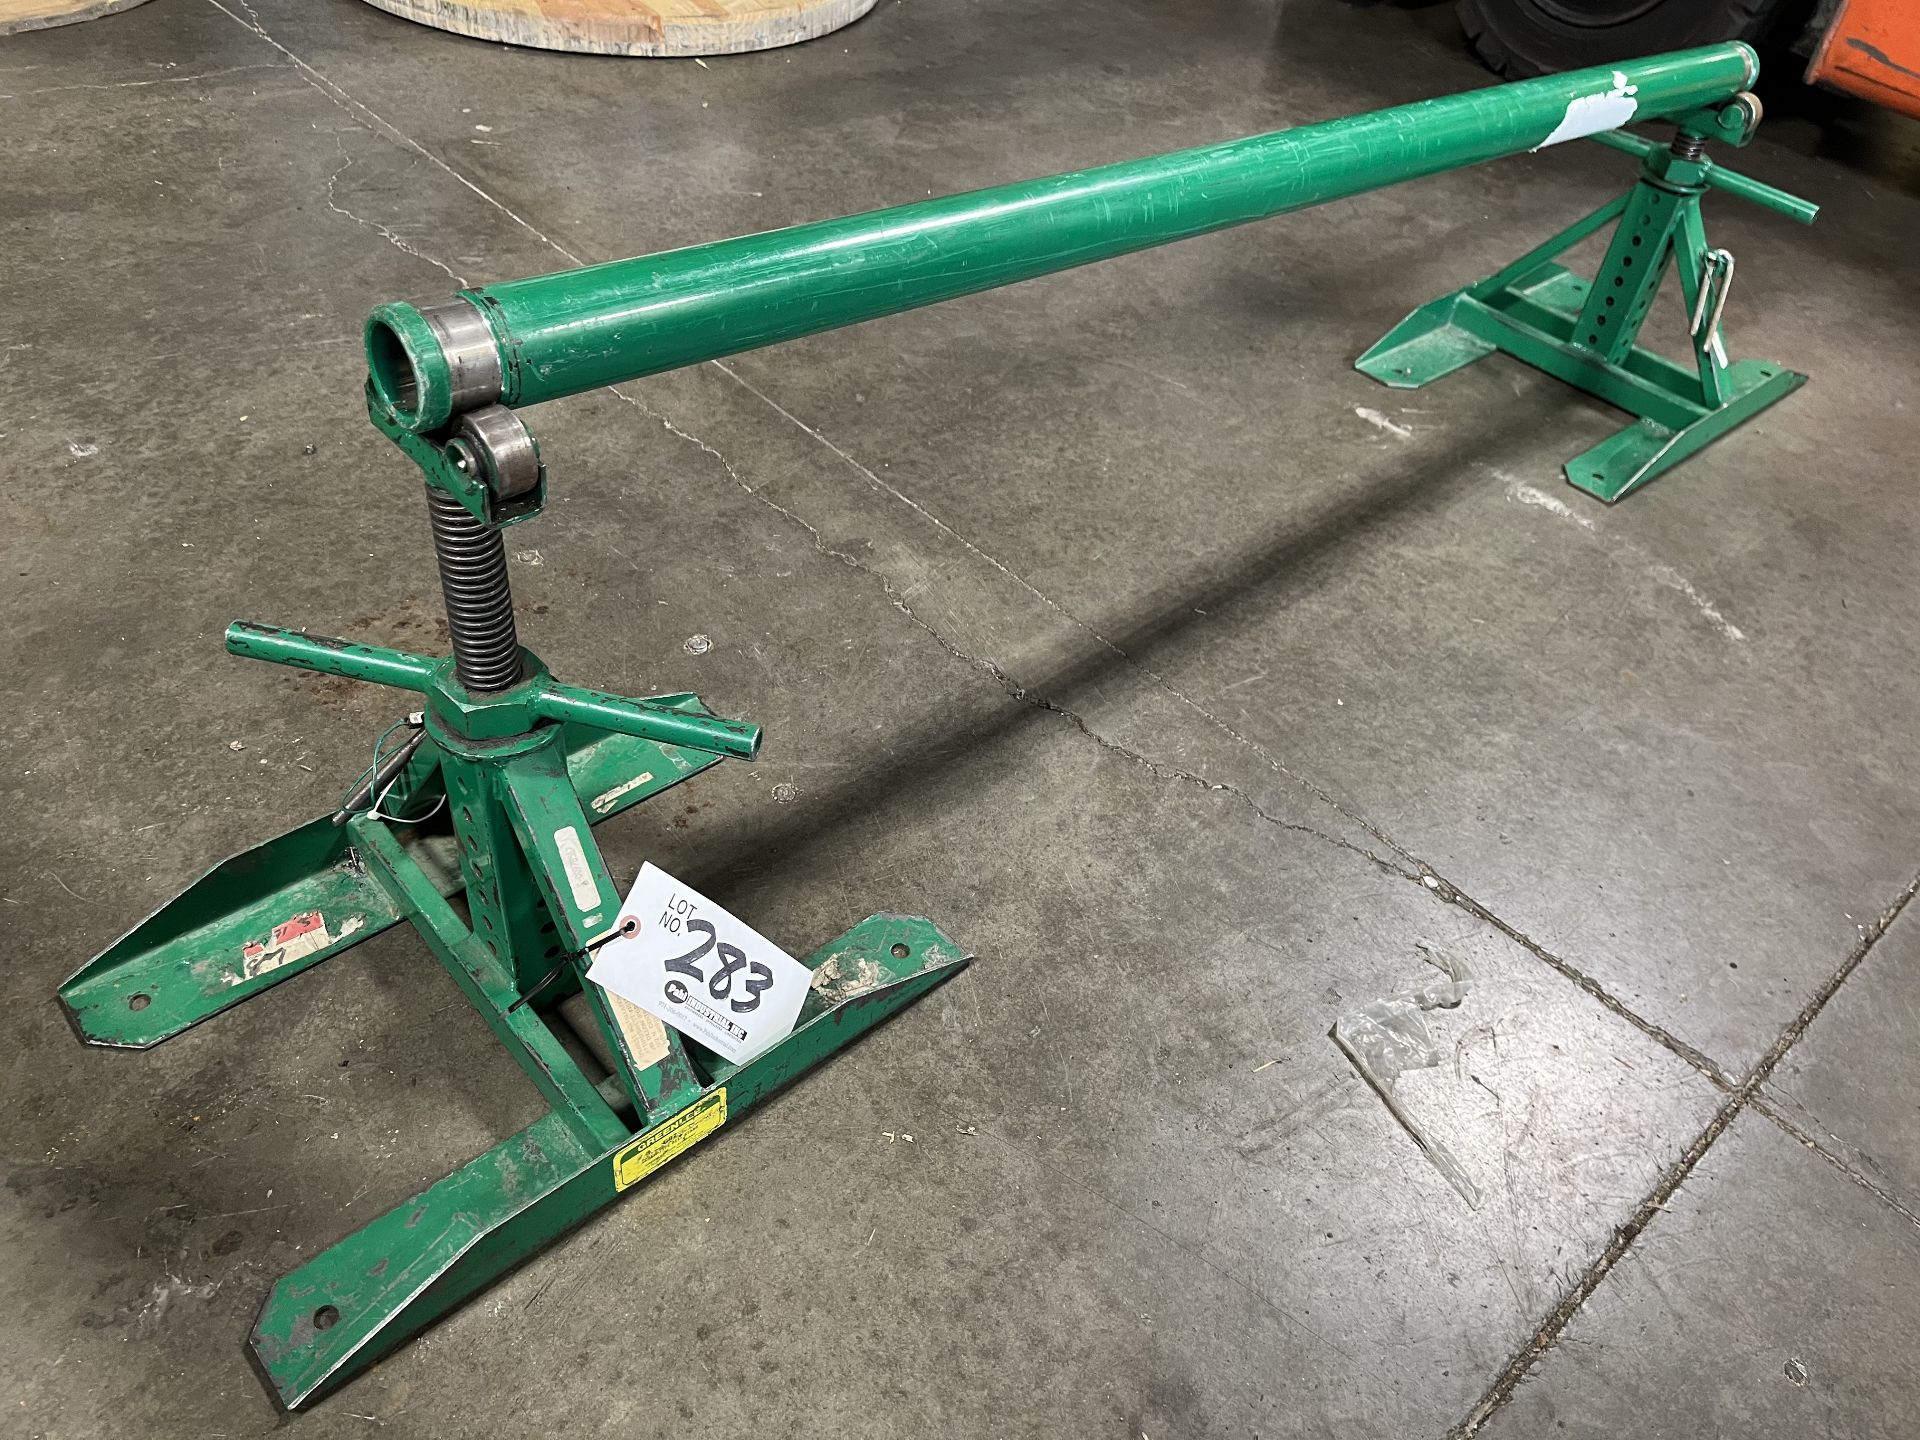 Set of Greenlee 687 Roller Stands with 5' axle